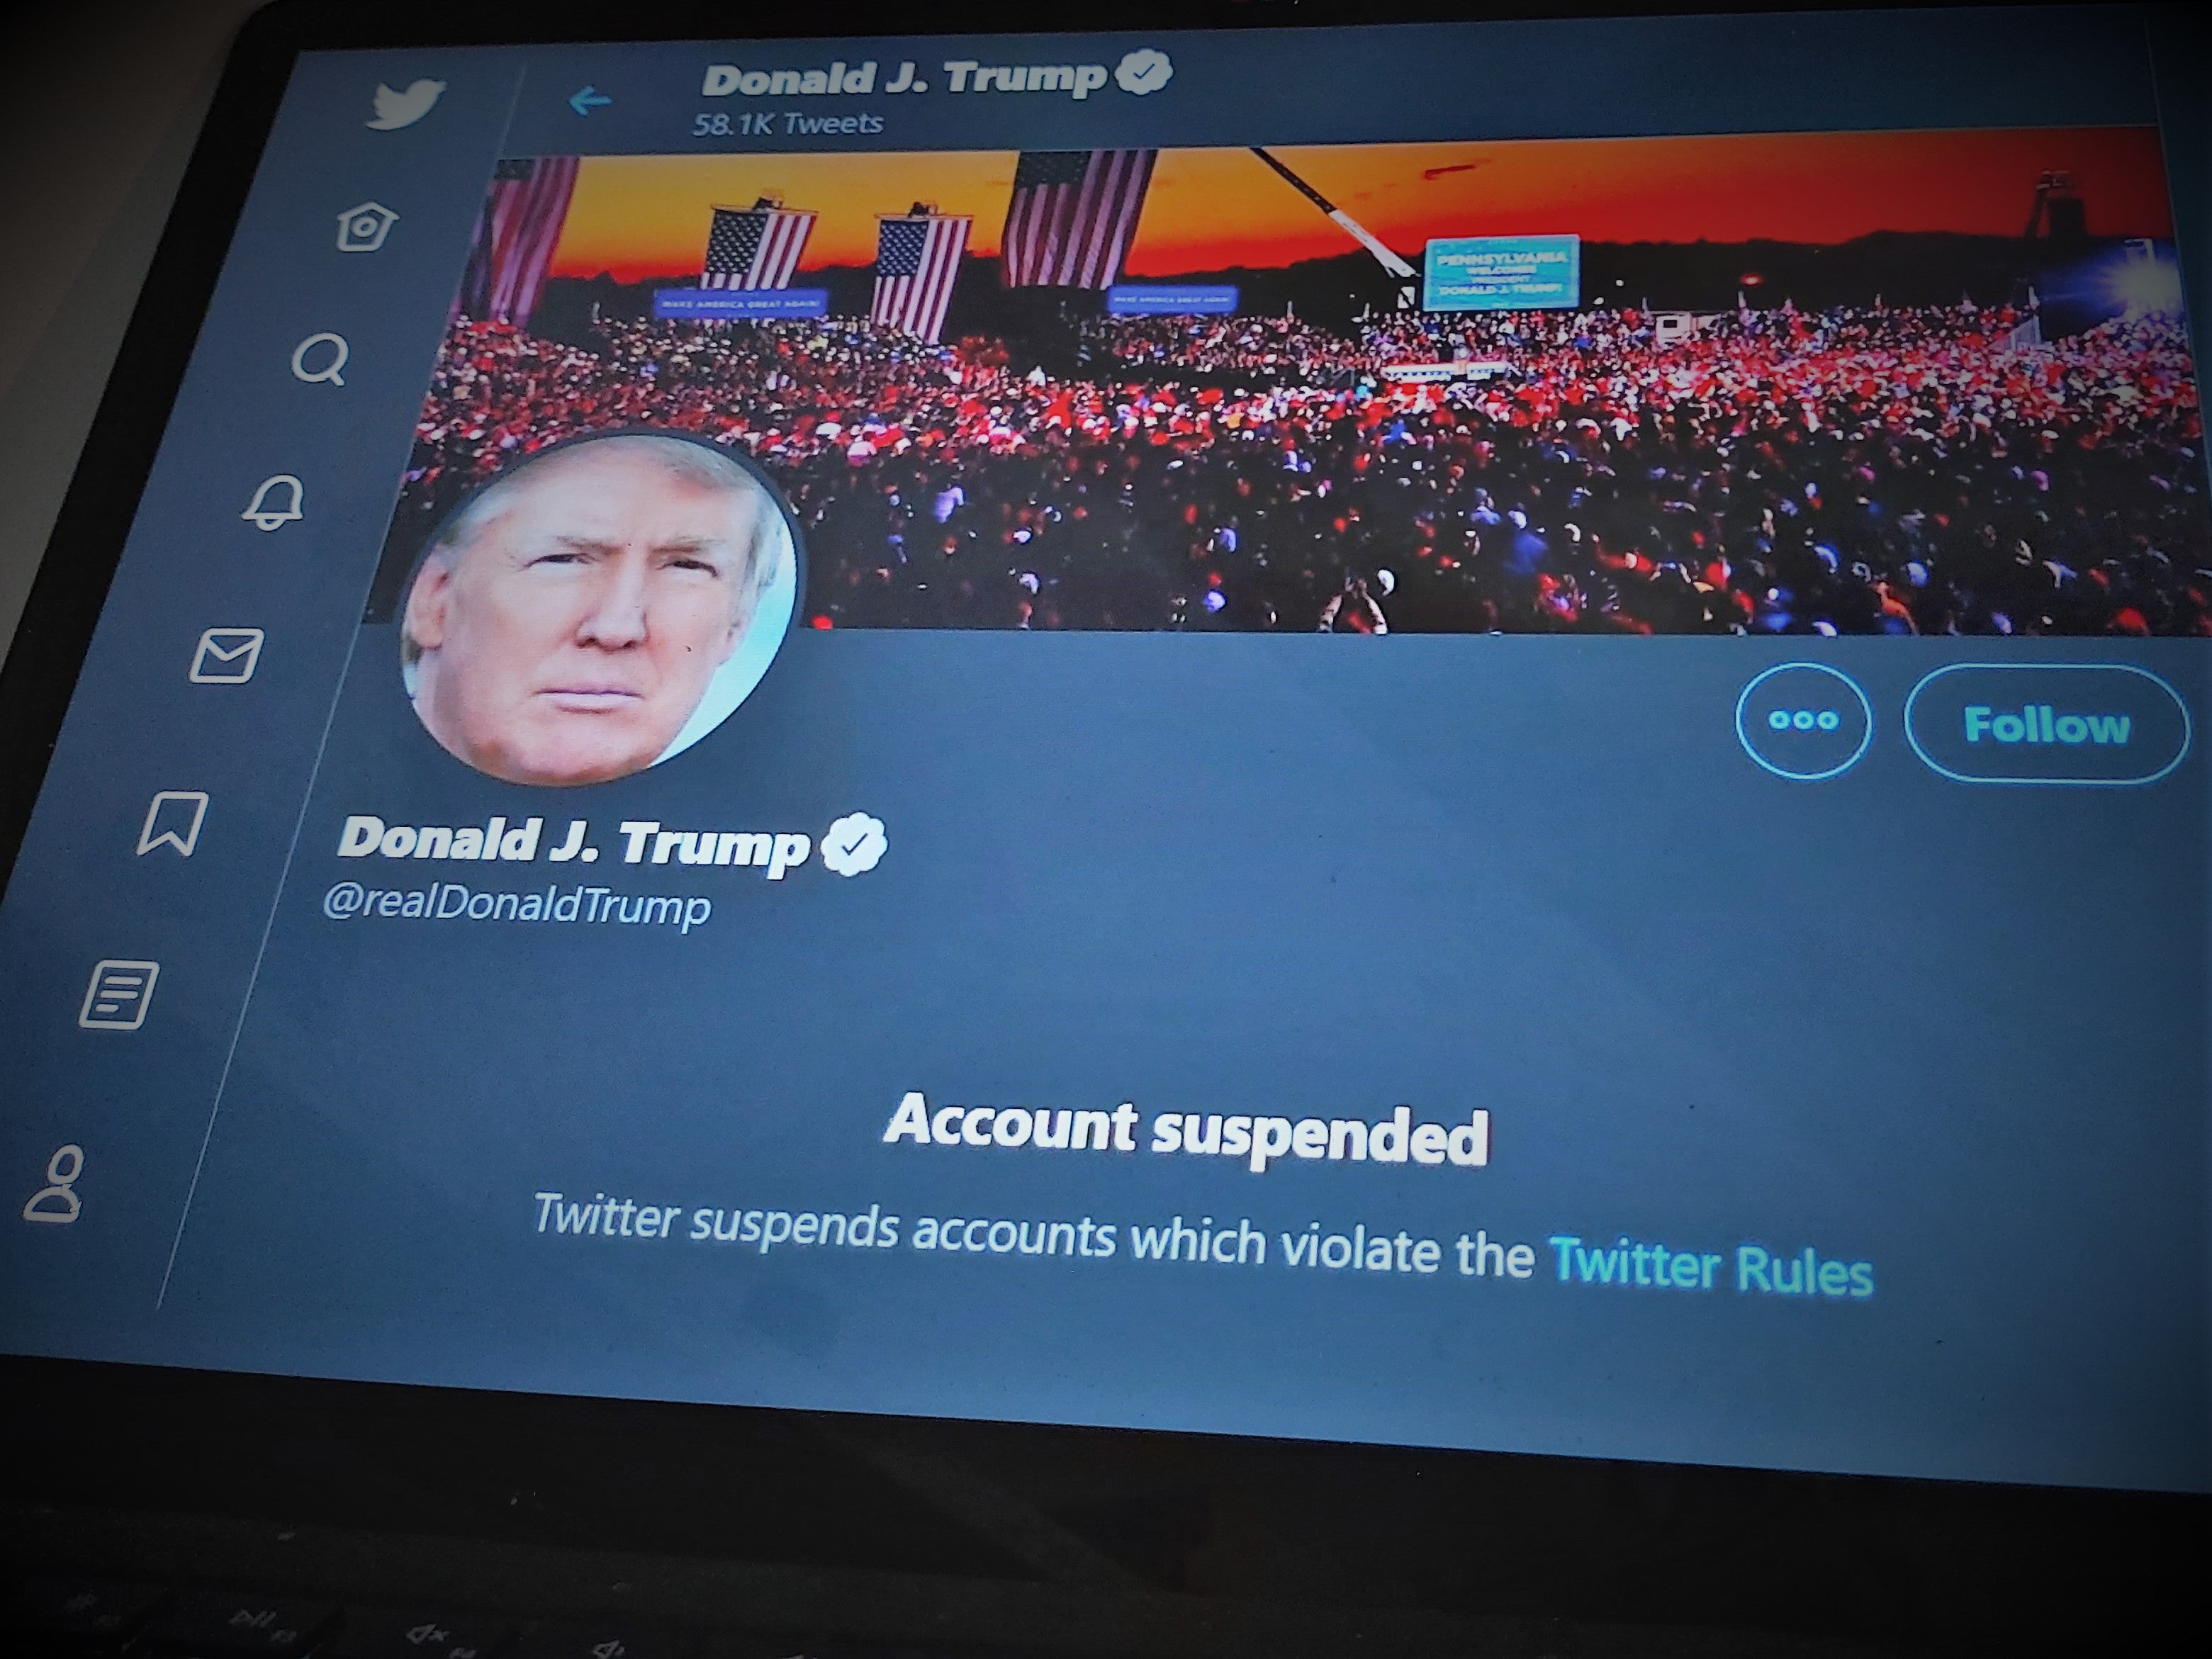 Trump could be banned from Twitter after he leaves office, company's rules indicate